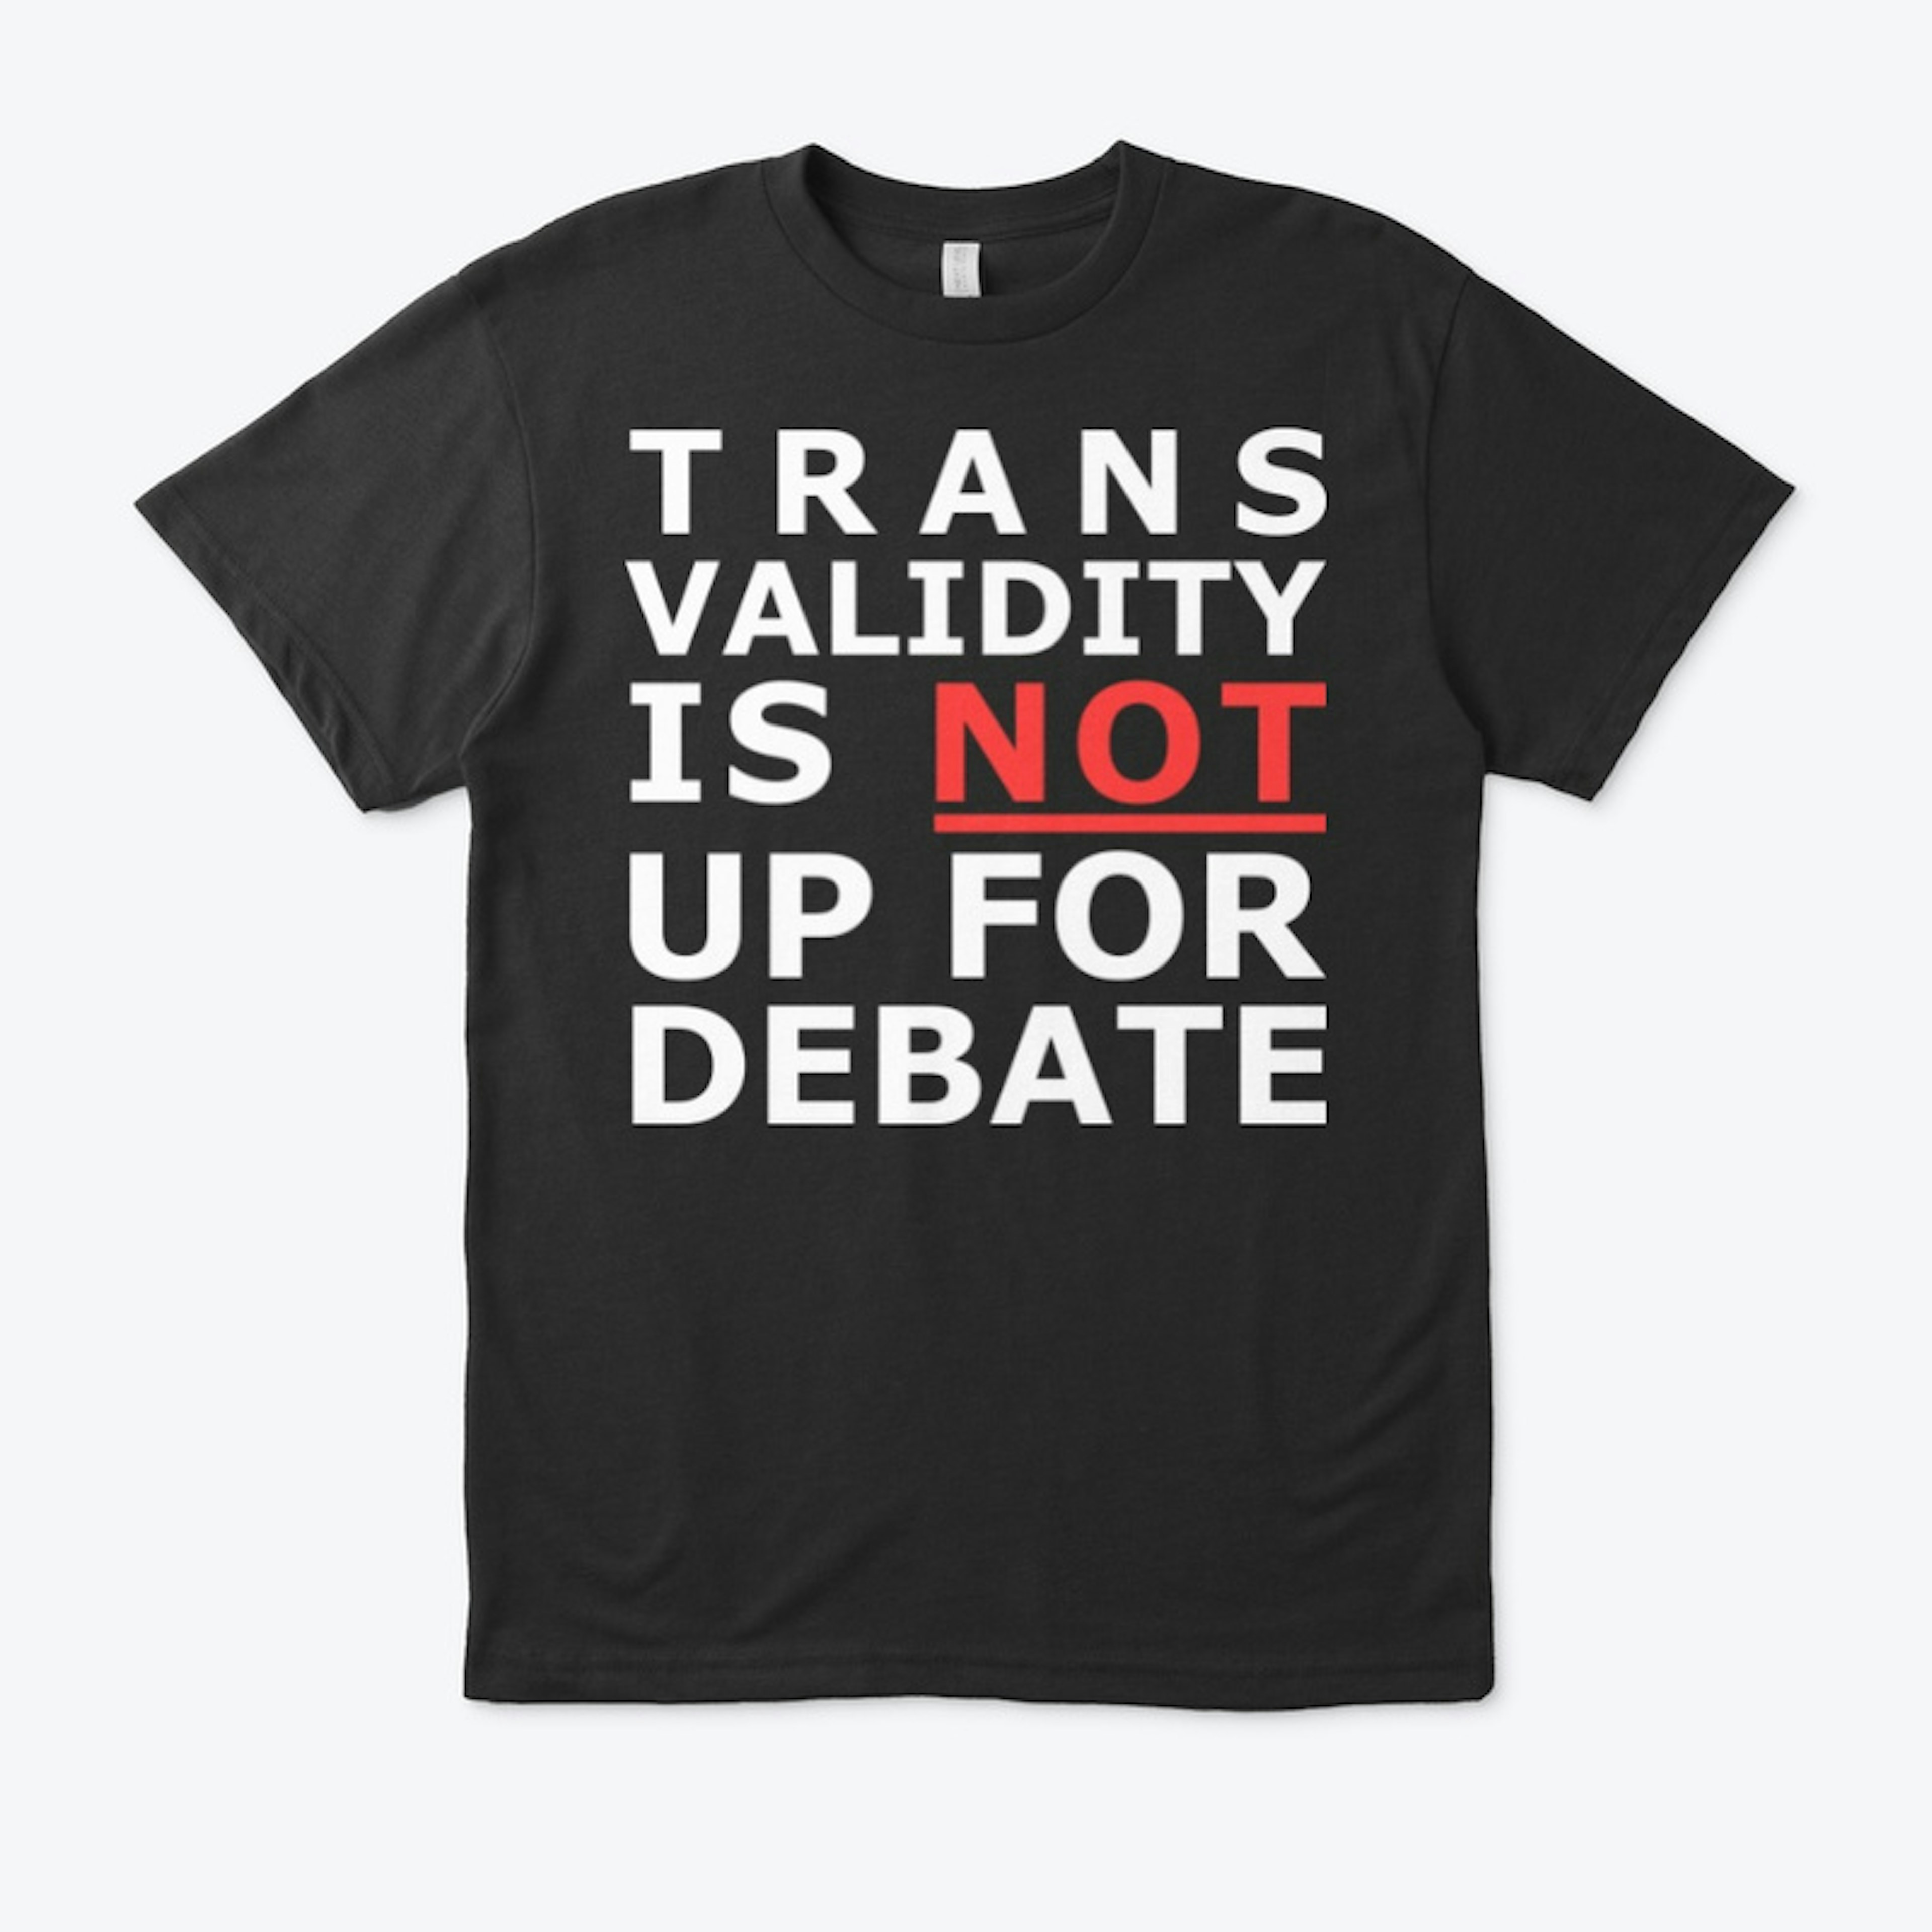 Trans Validity Is Not Up For Debate